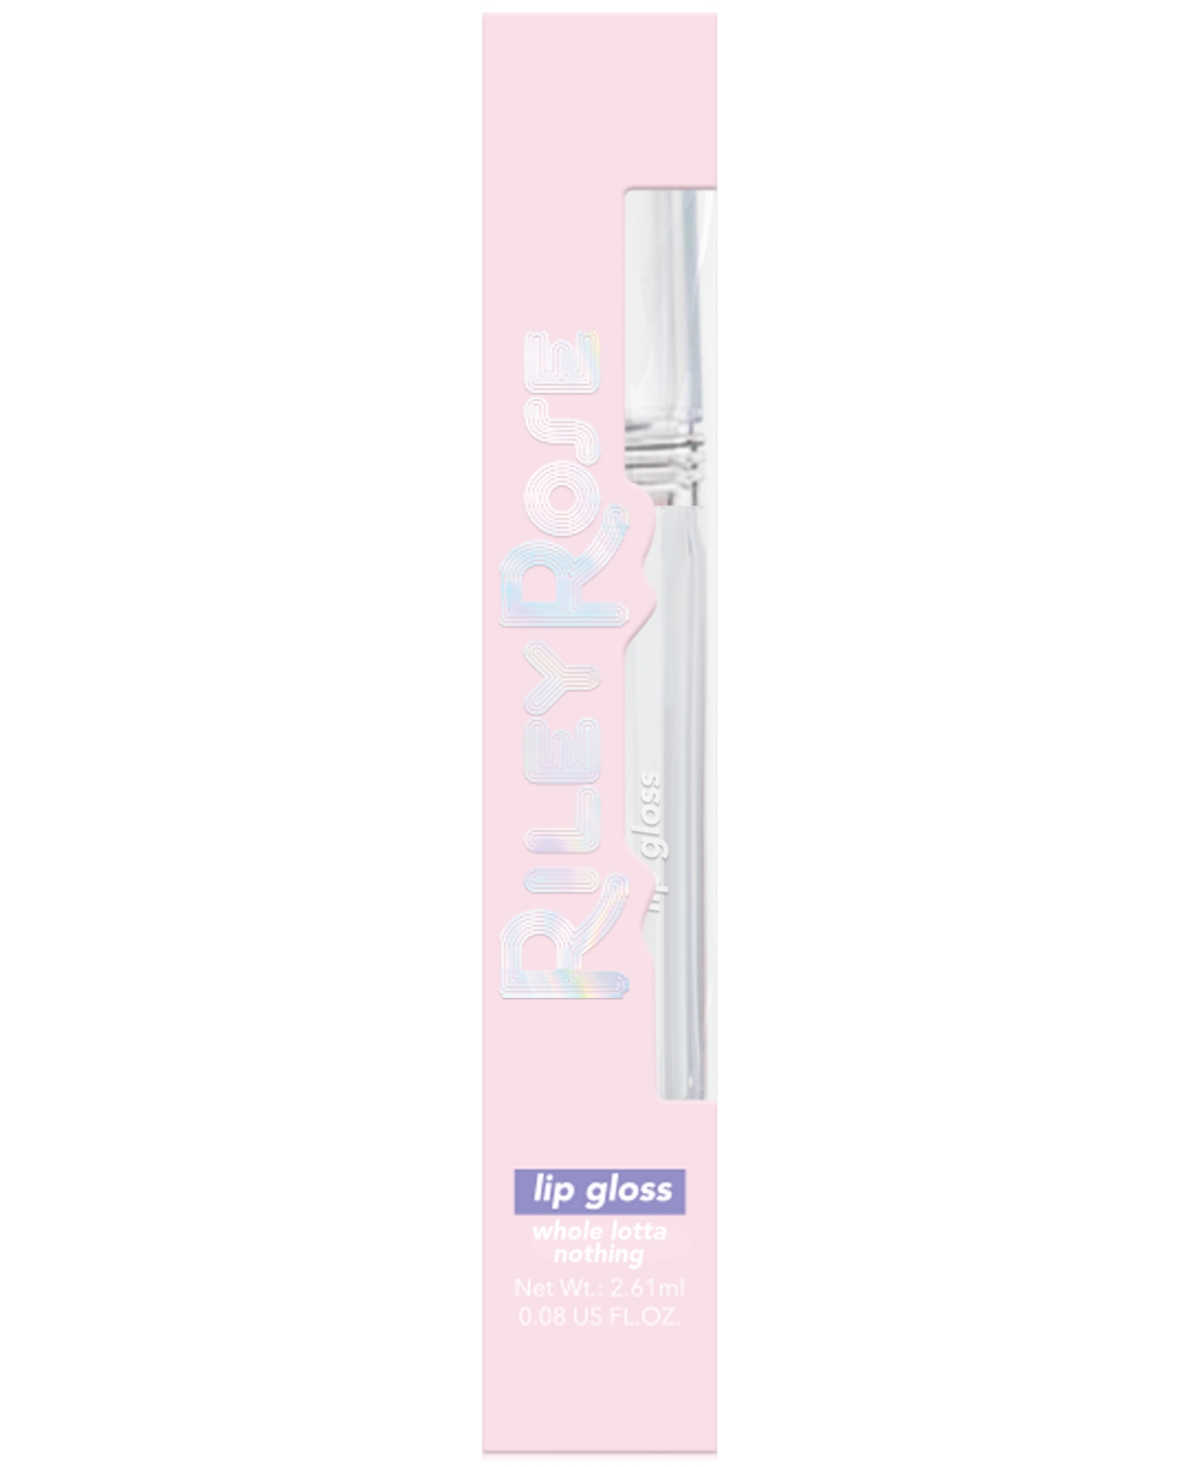 Riley Rose Lip Gloss In Whole Lotta Nothing